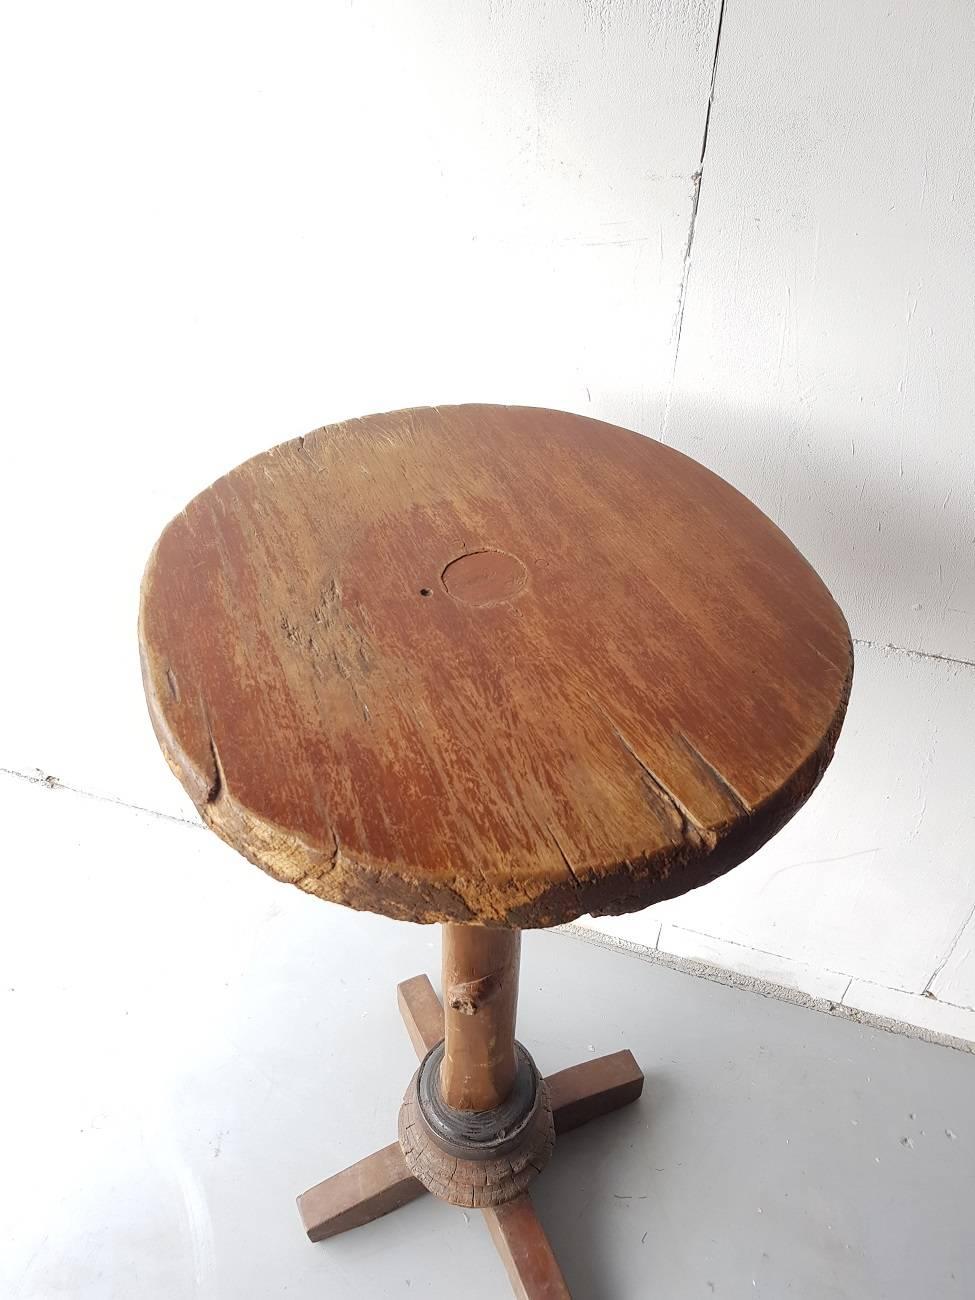 Dutch vintage wooden pub table made from a tree trunk and two old wooden shafts second half of the 20th century.

The measurements are,
Depth 53 cm/ 20.8 inch.
Width 53 cm/ 20.8 inch.
Height 105 cm/ 41.3 inch.
  